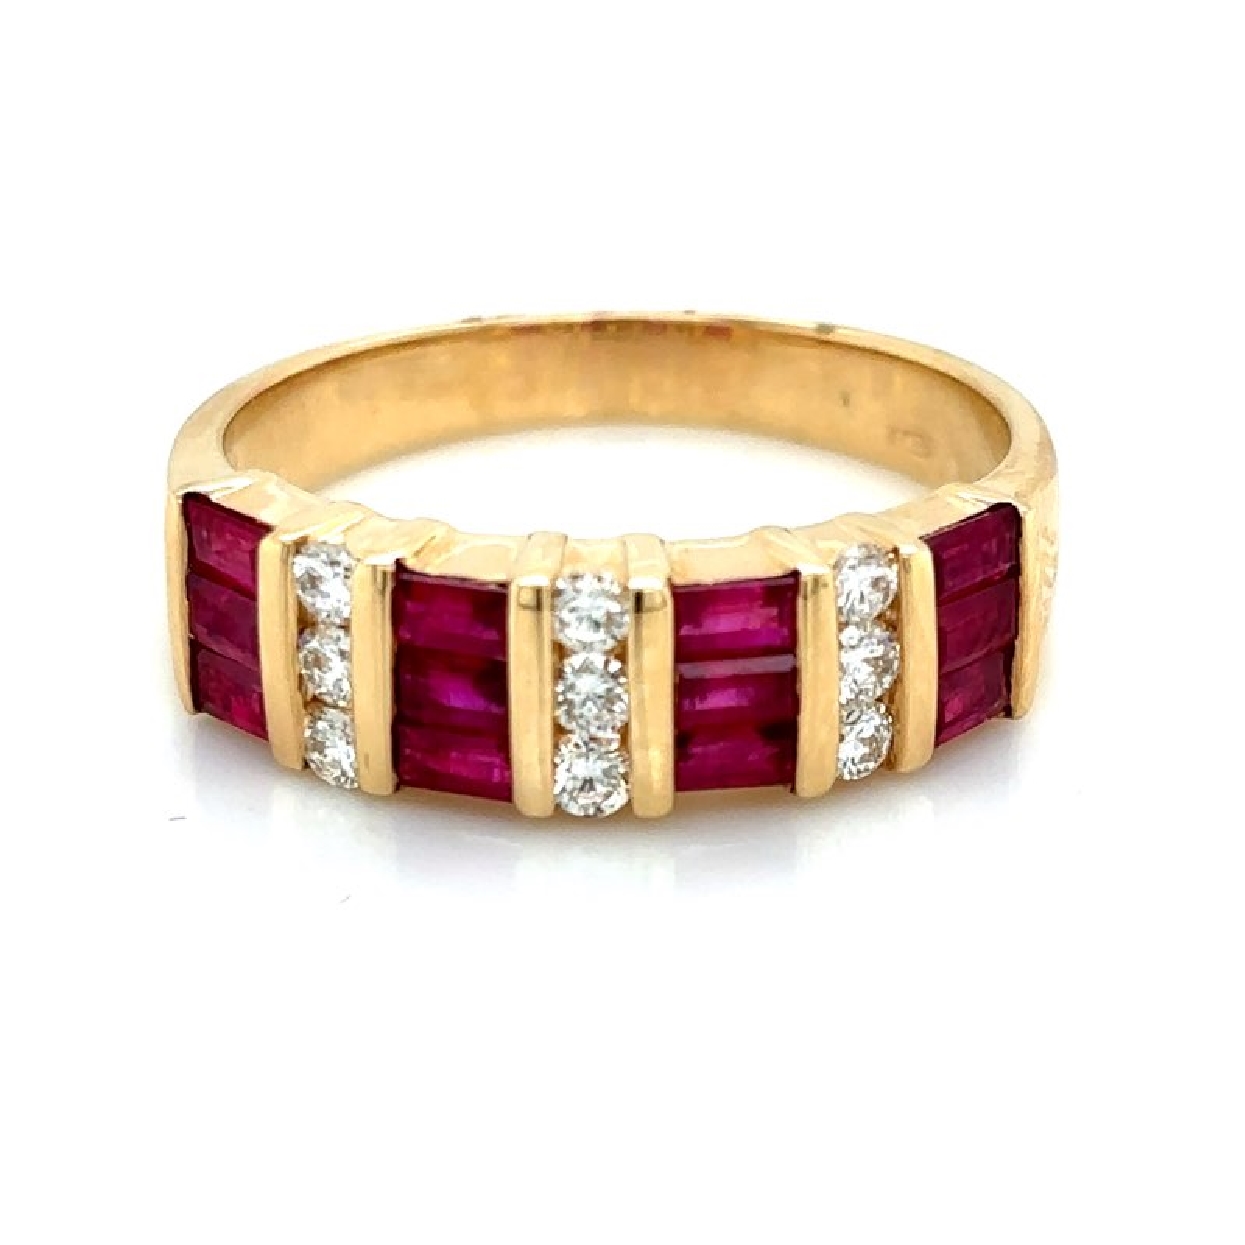 14K Yellow Gold Ring with Three Rows of Rubies 1CT and Diamonds .24CT

 Size 7 